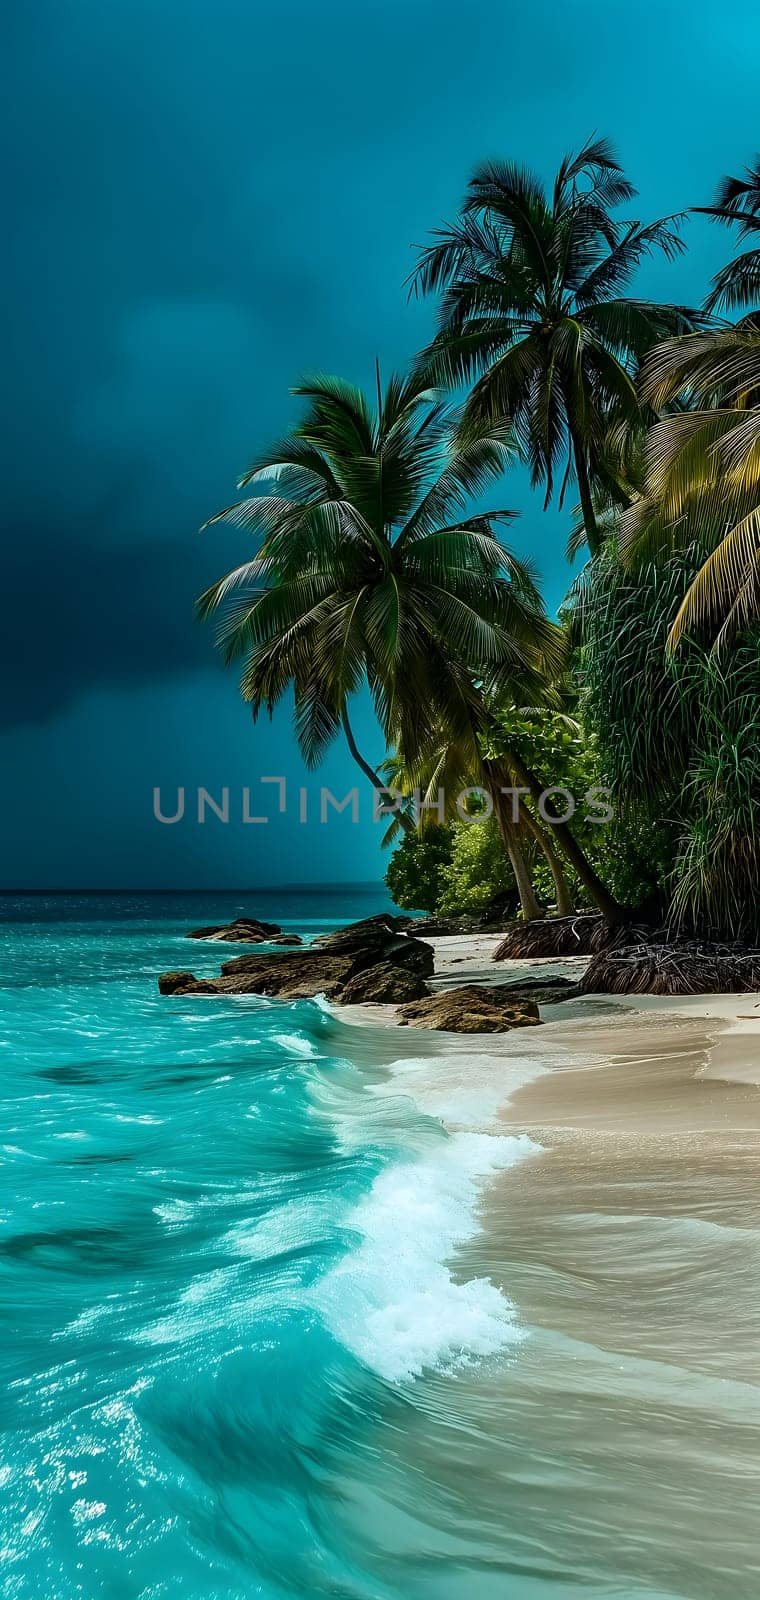 tropical beach view at cloudy stormy night with white sand, turquoise water and palm trees, neural network generated image by z1b